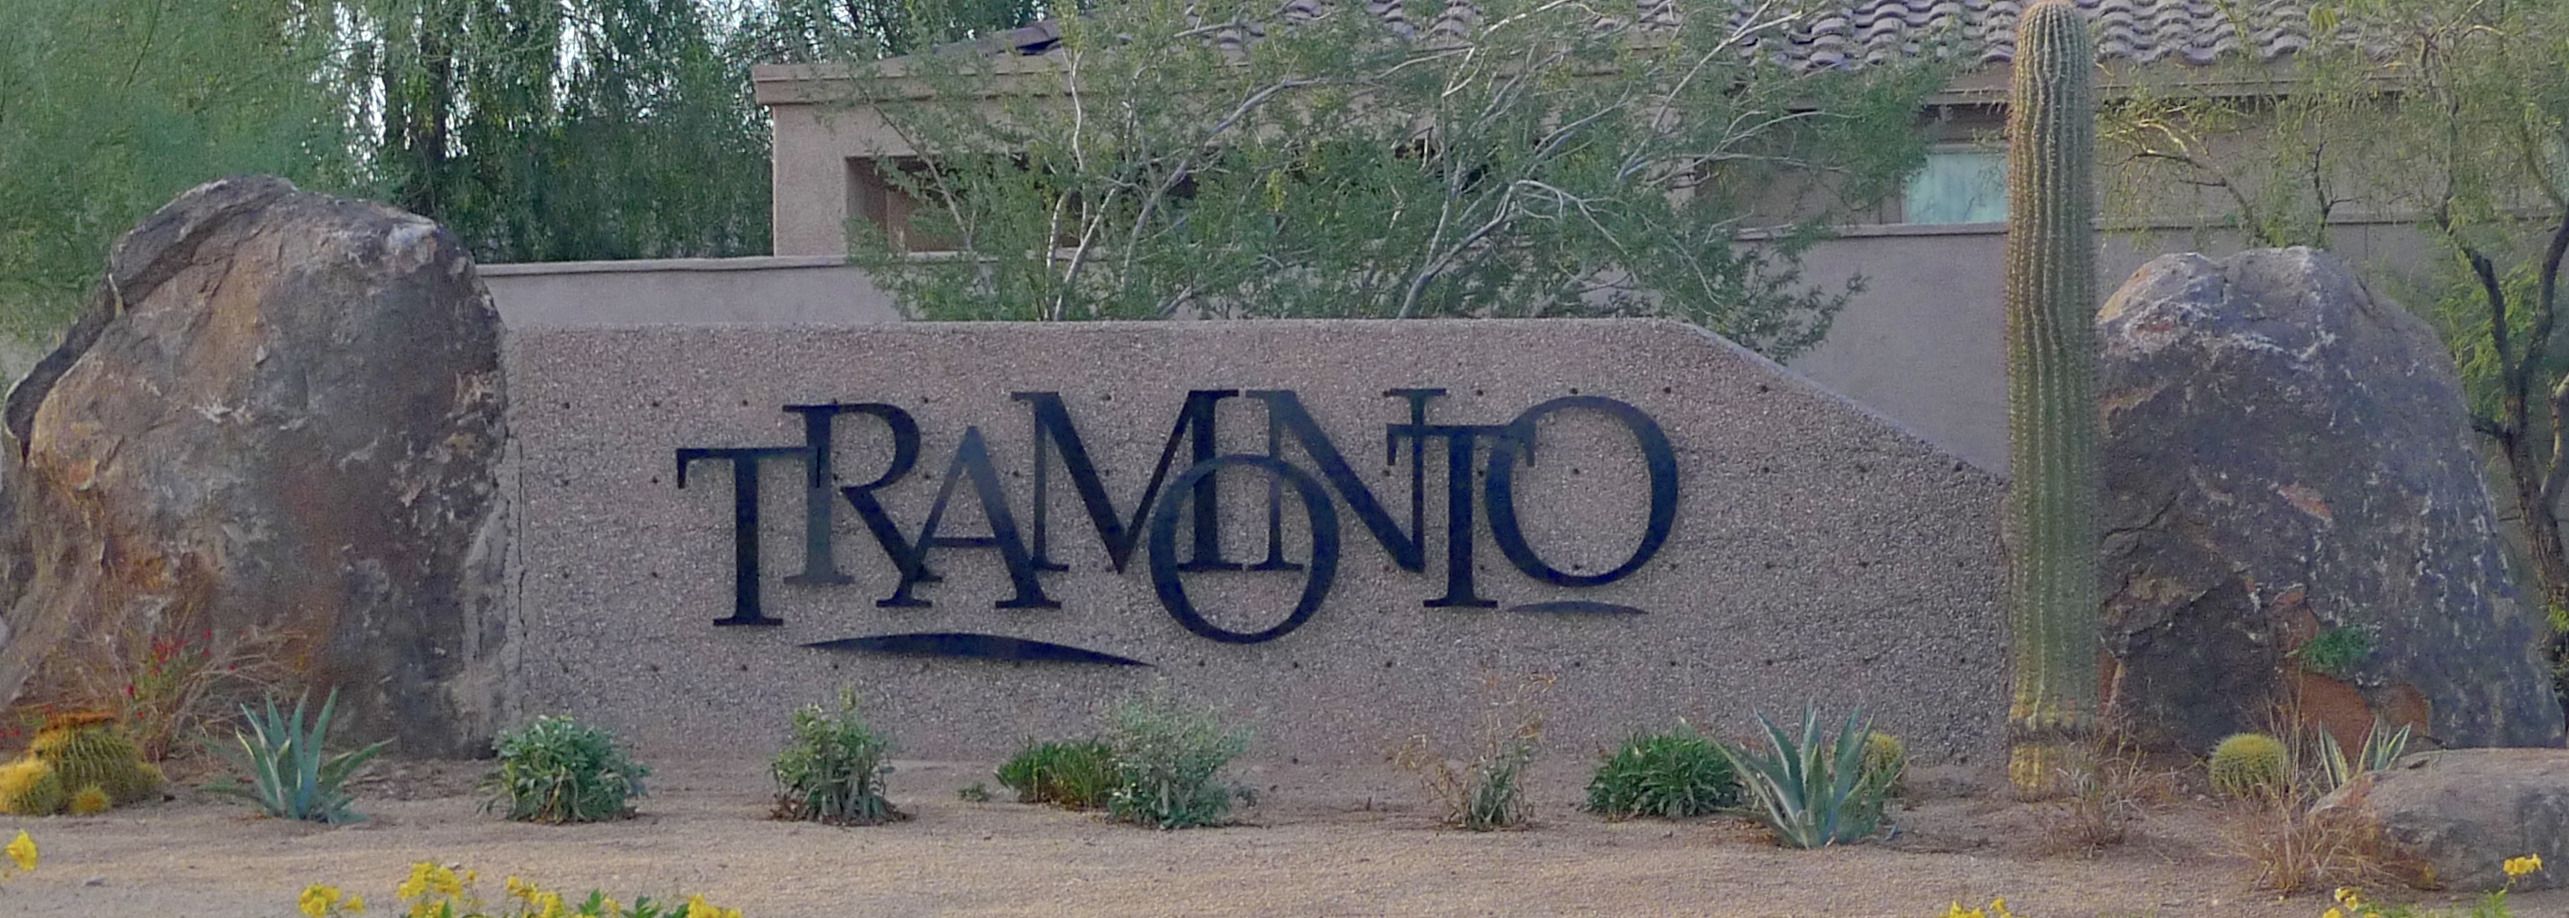 Tramonto Homes for Sale